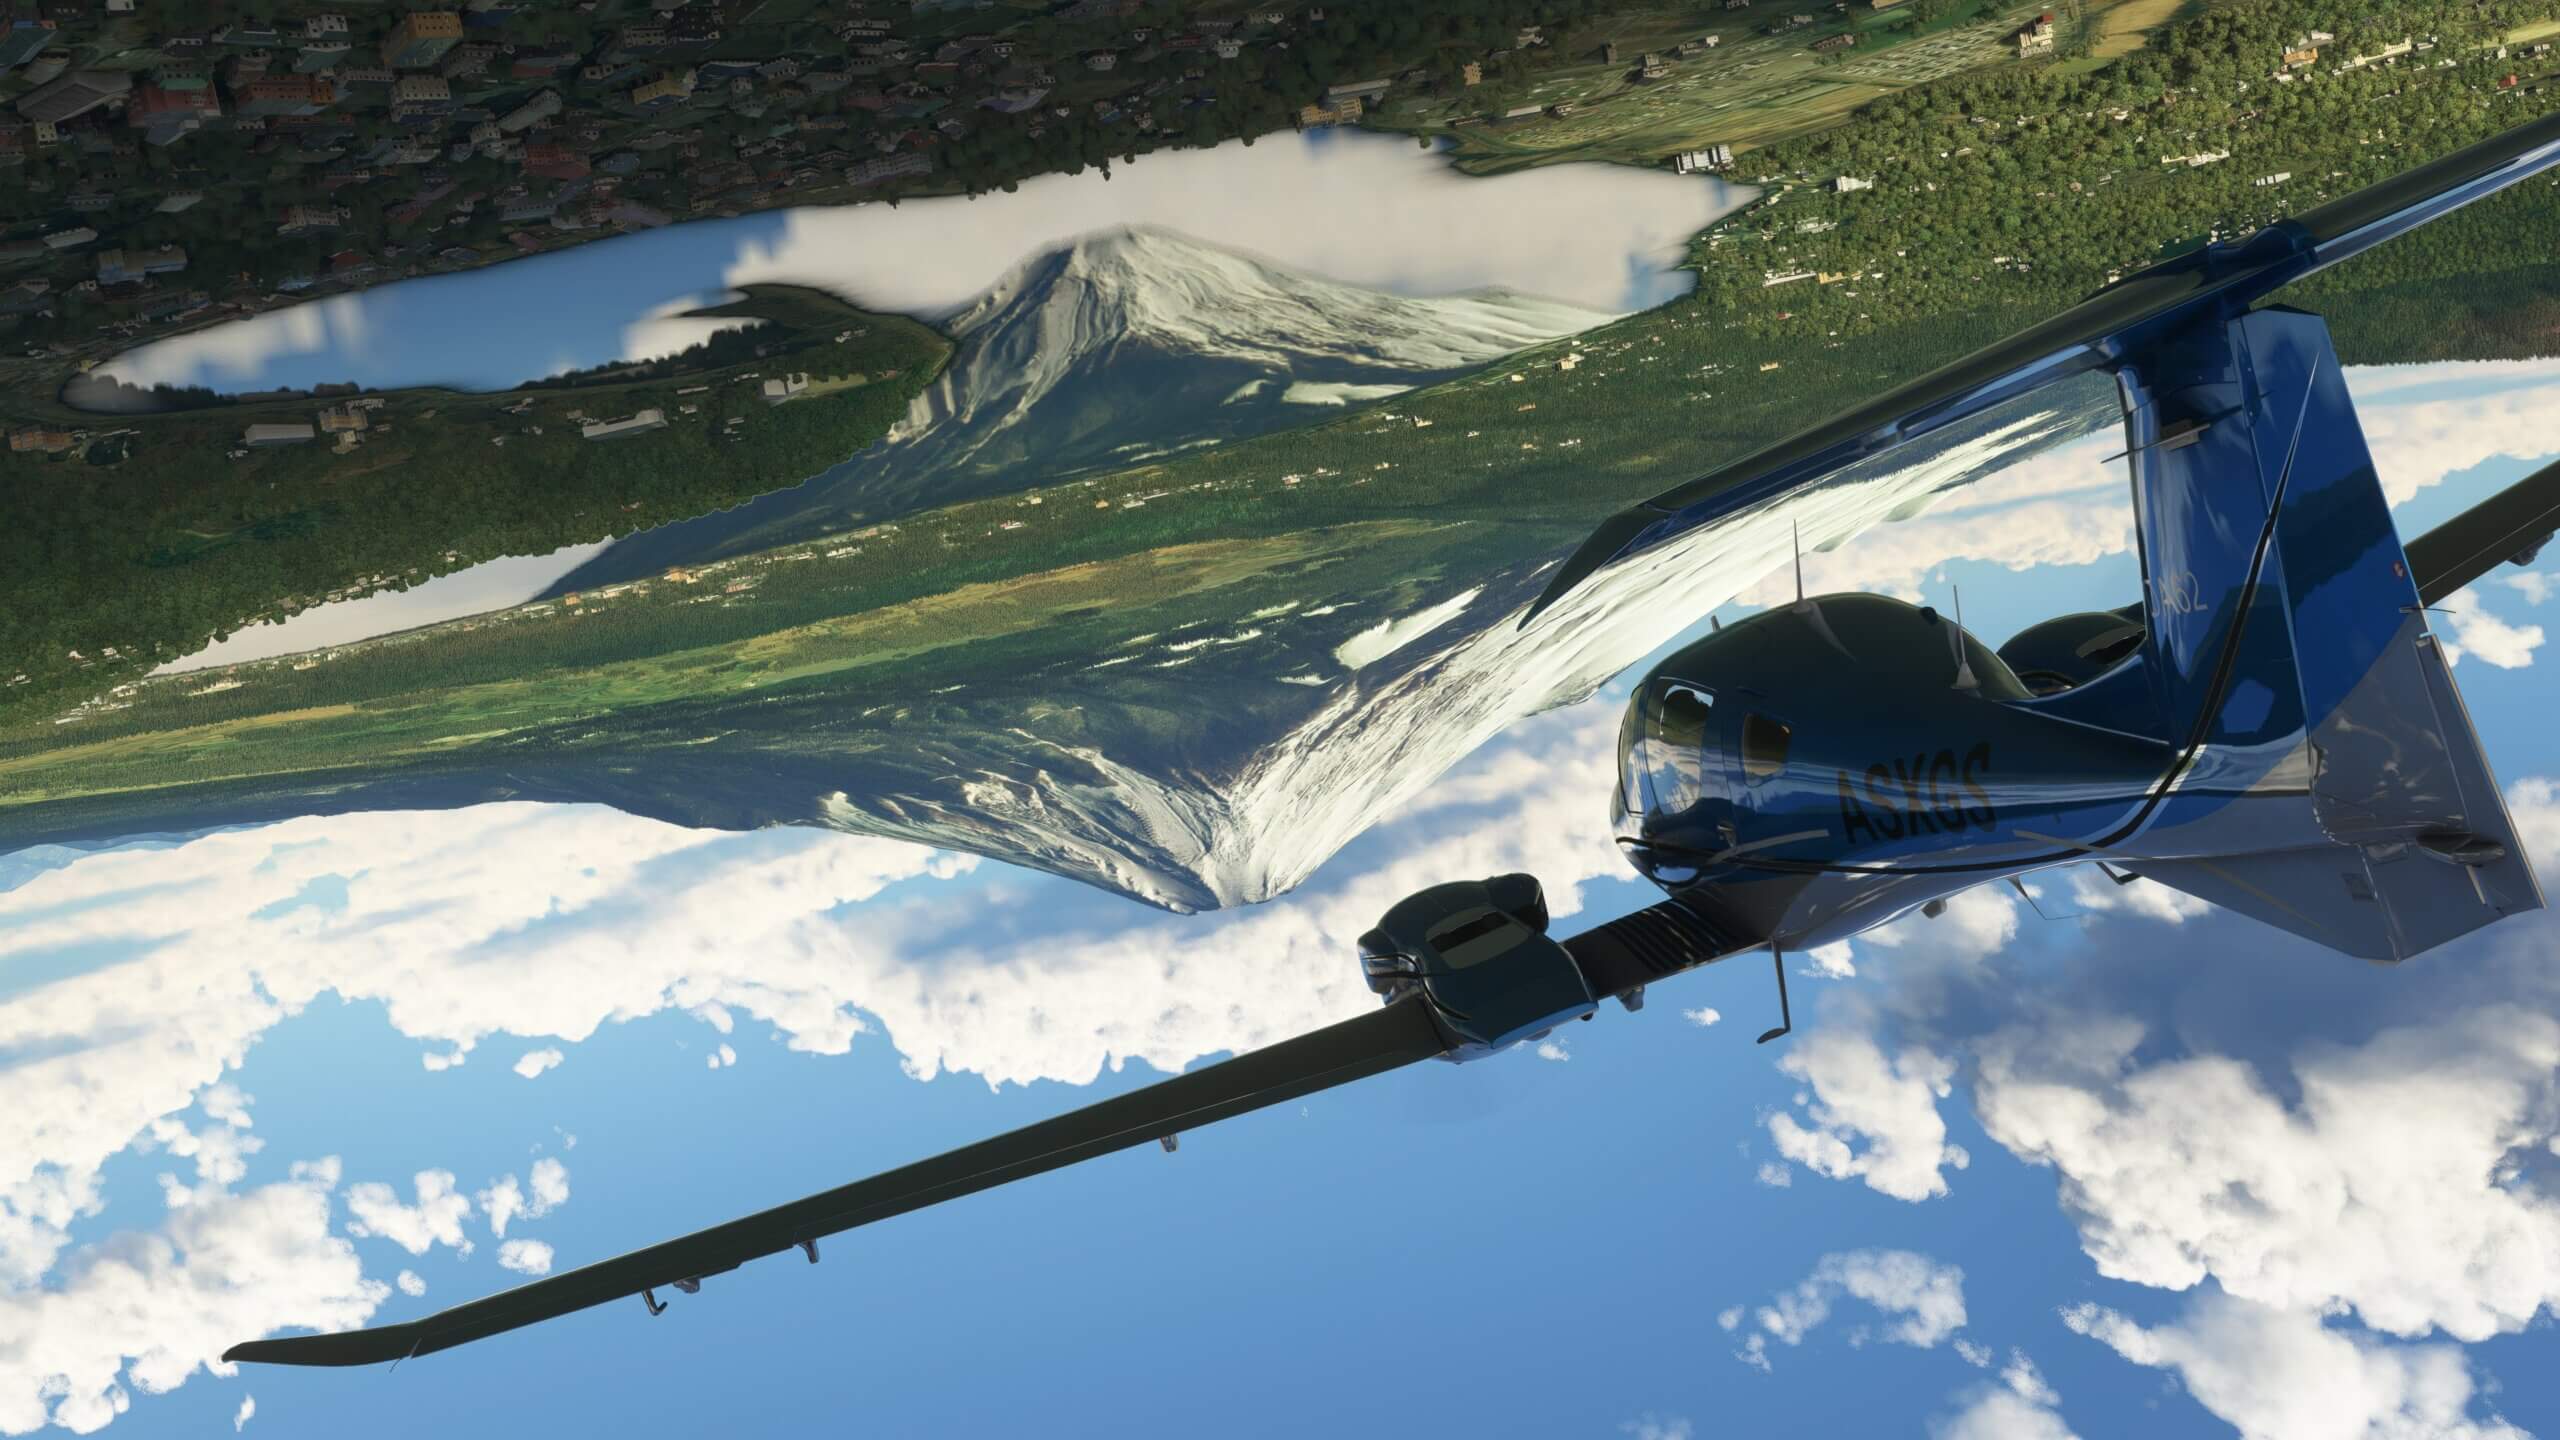 A DA-62 heads towards a Volcano whilst flying inverted, as the image of the Volcano is reflected on a lake below.